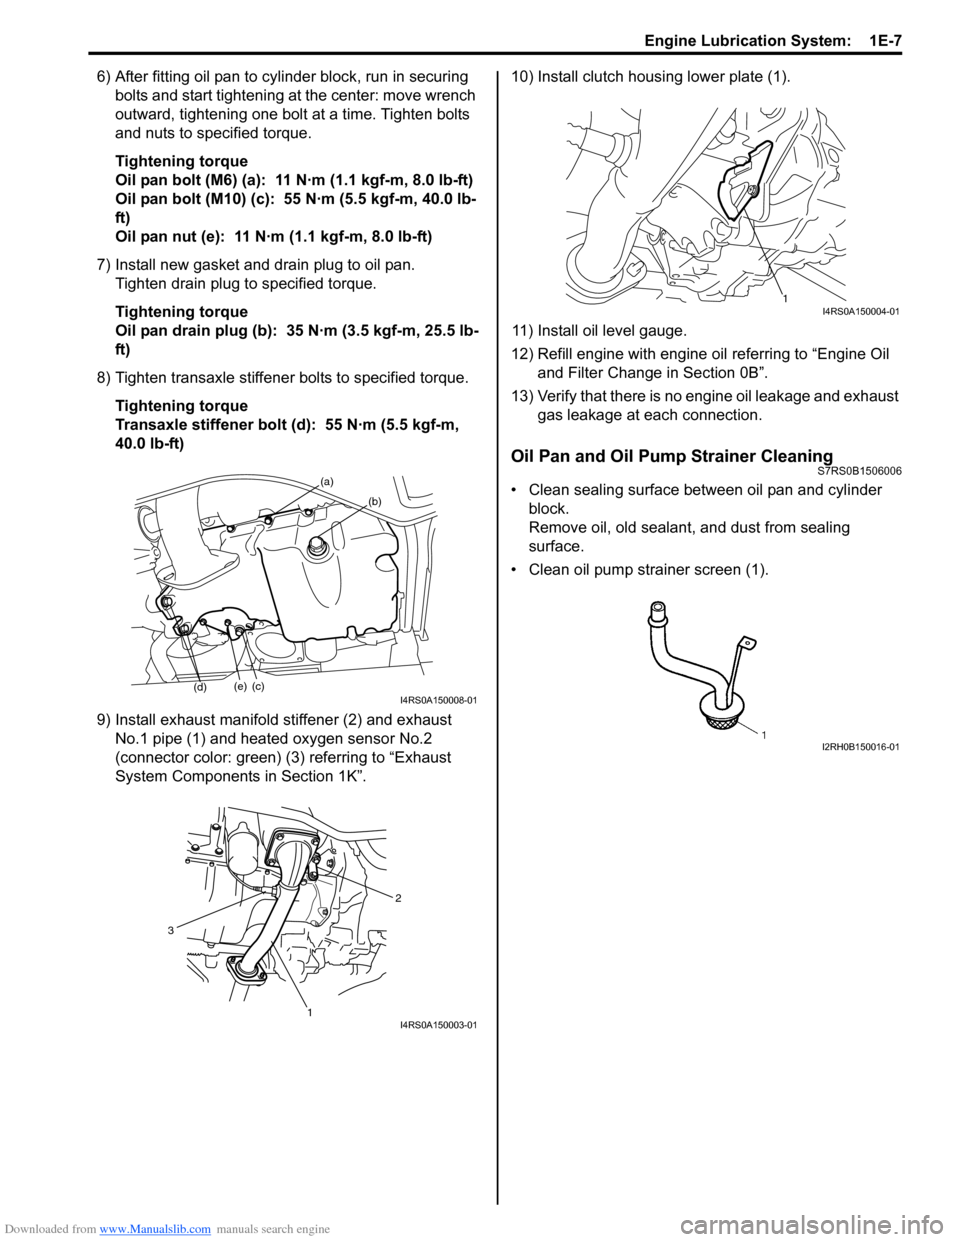 SUZUKI SWIFT 2008 2.G Service Workshop Manual Downloaded from www.Manualslib.com manuals search engine Engine Lubrication System:  1E-7
6) After fitting oil pan to cylinder block, run in securing bolts and start tightening at the center: move wre